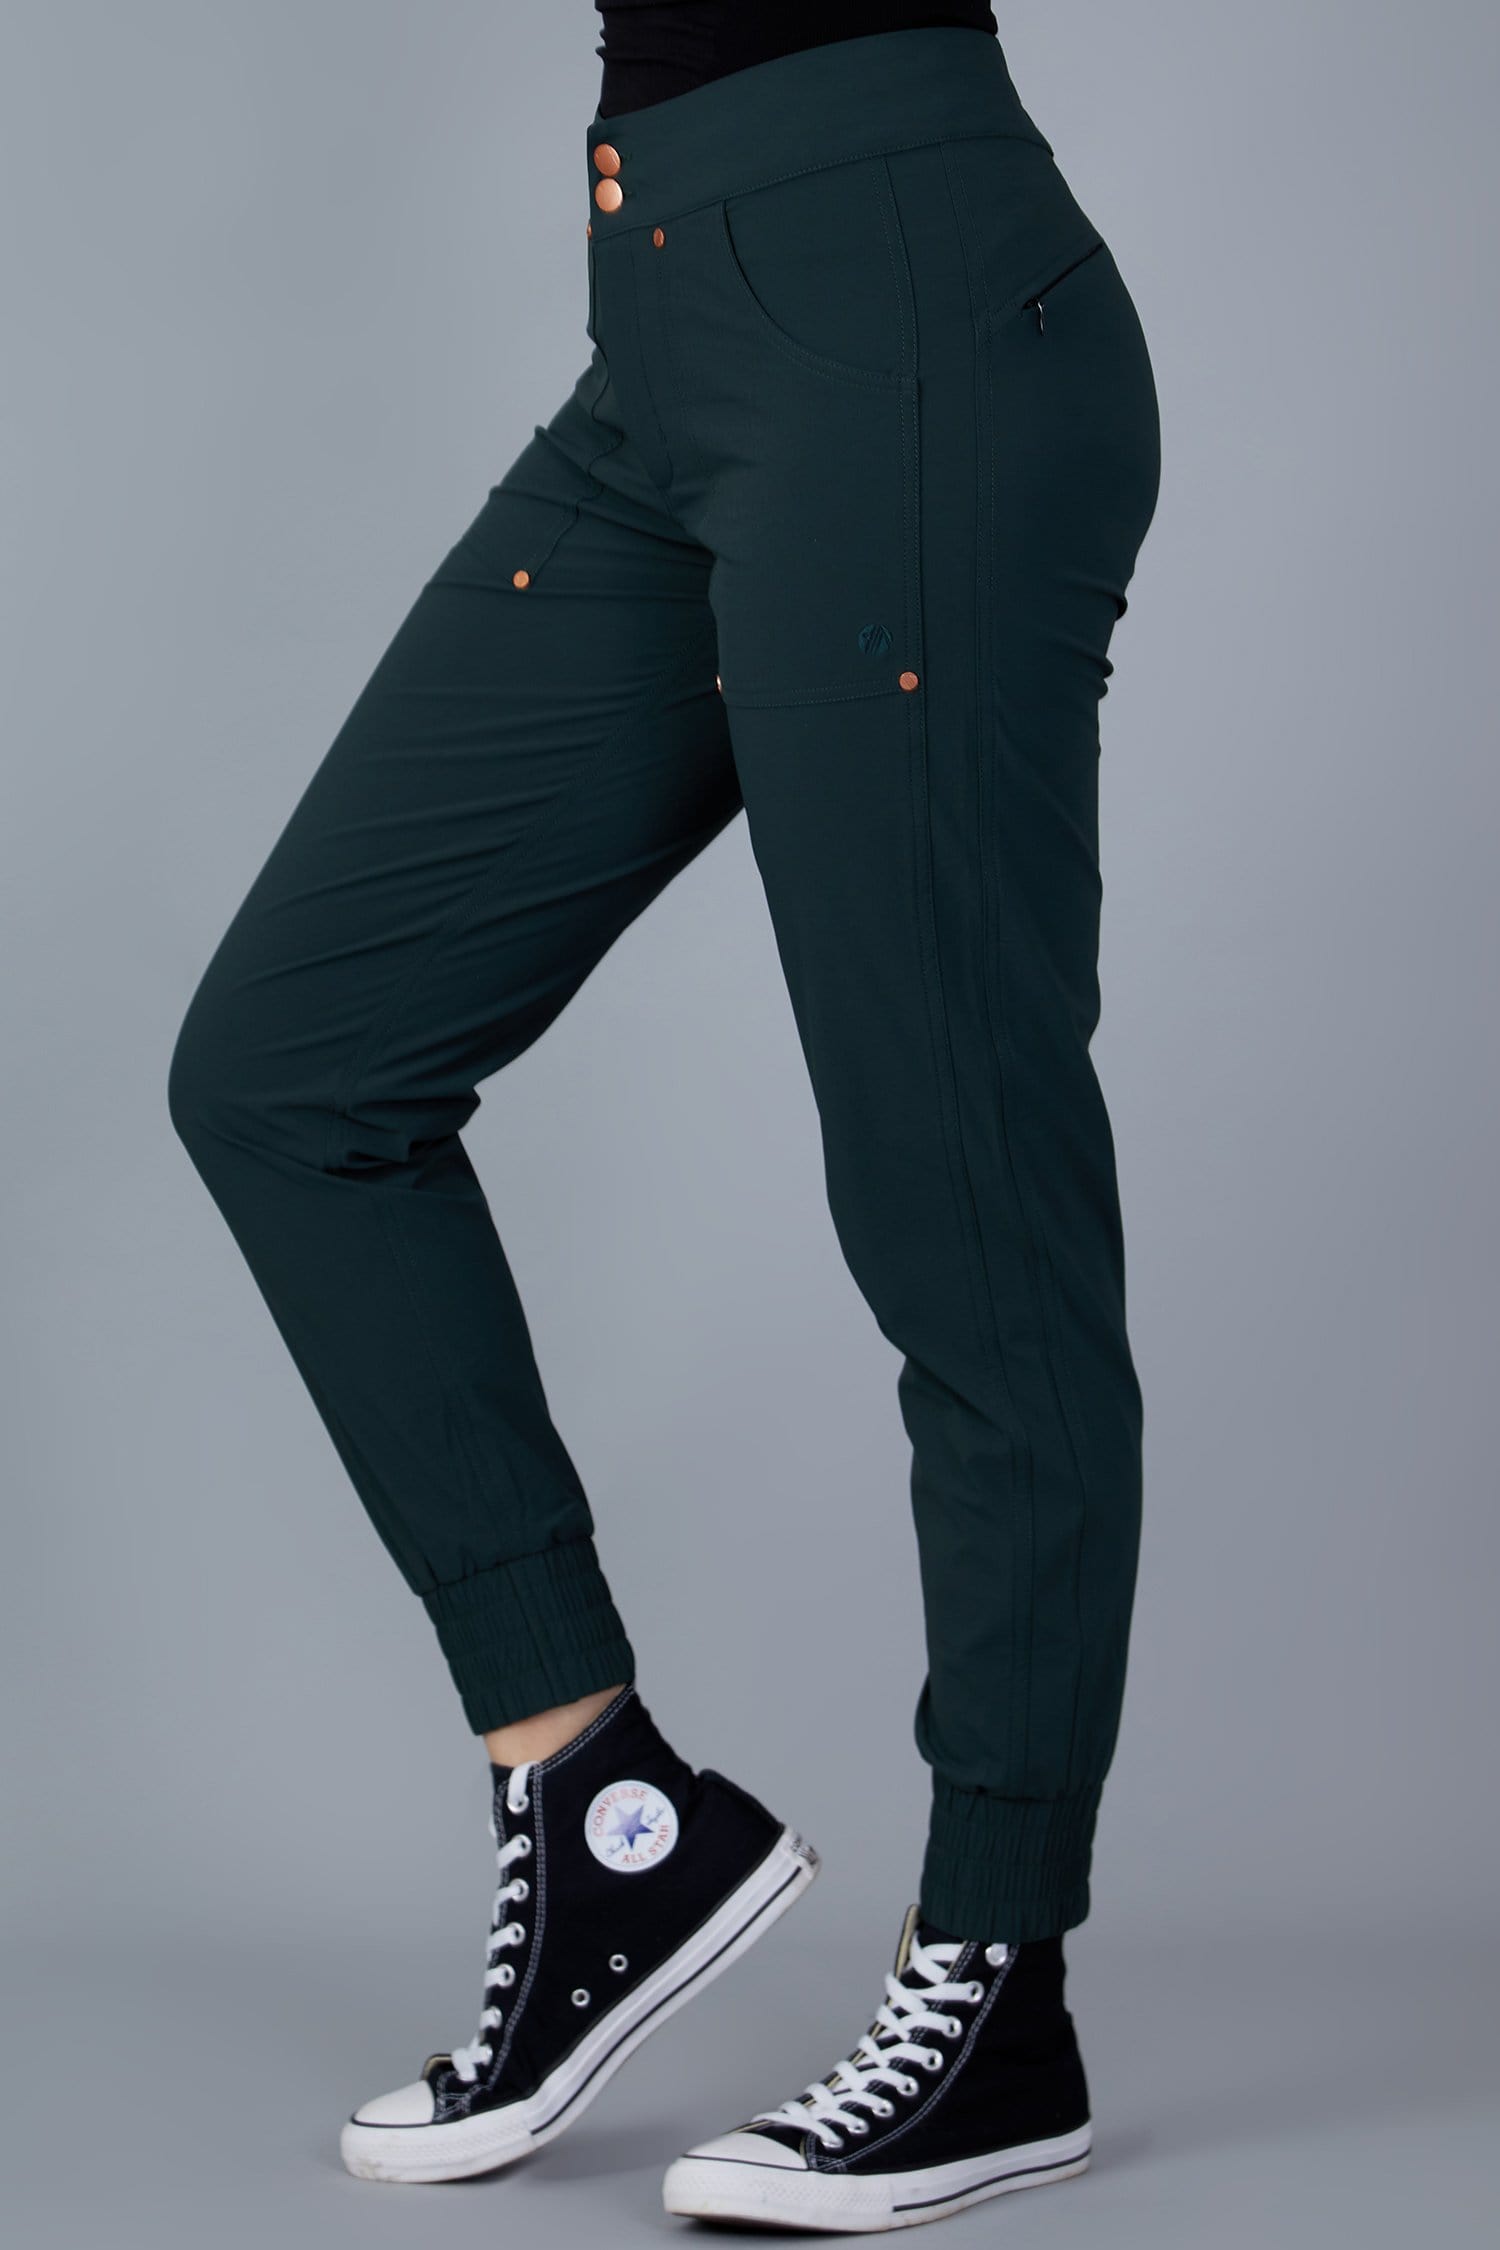 Casual Stroll Pants - Forest Green - 38r / Uk20 - Womens - Acai Outdoorwear